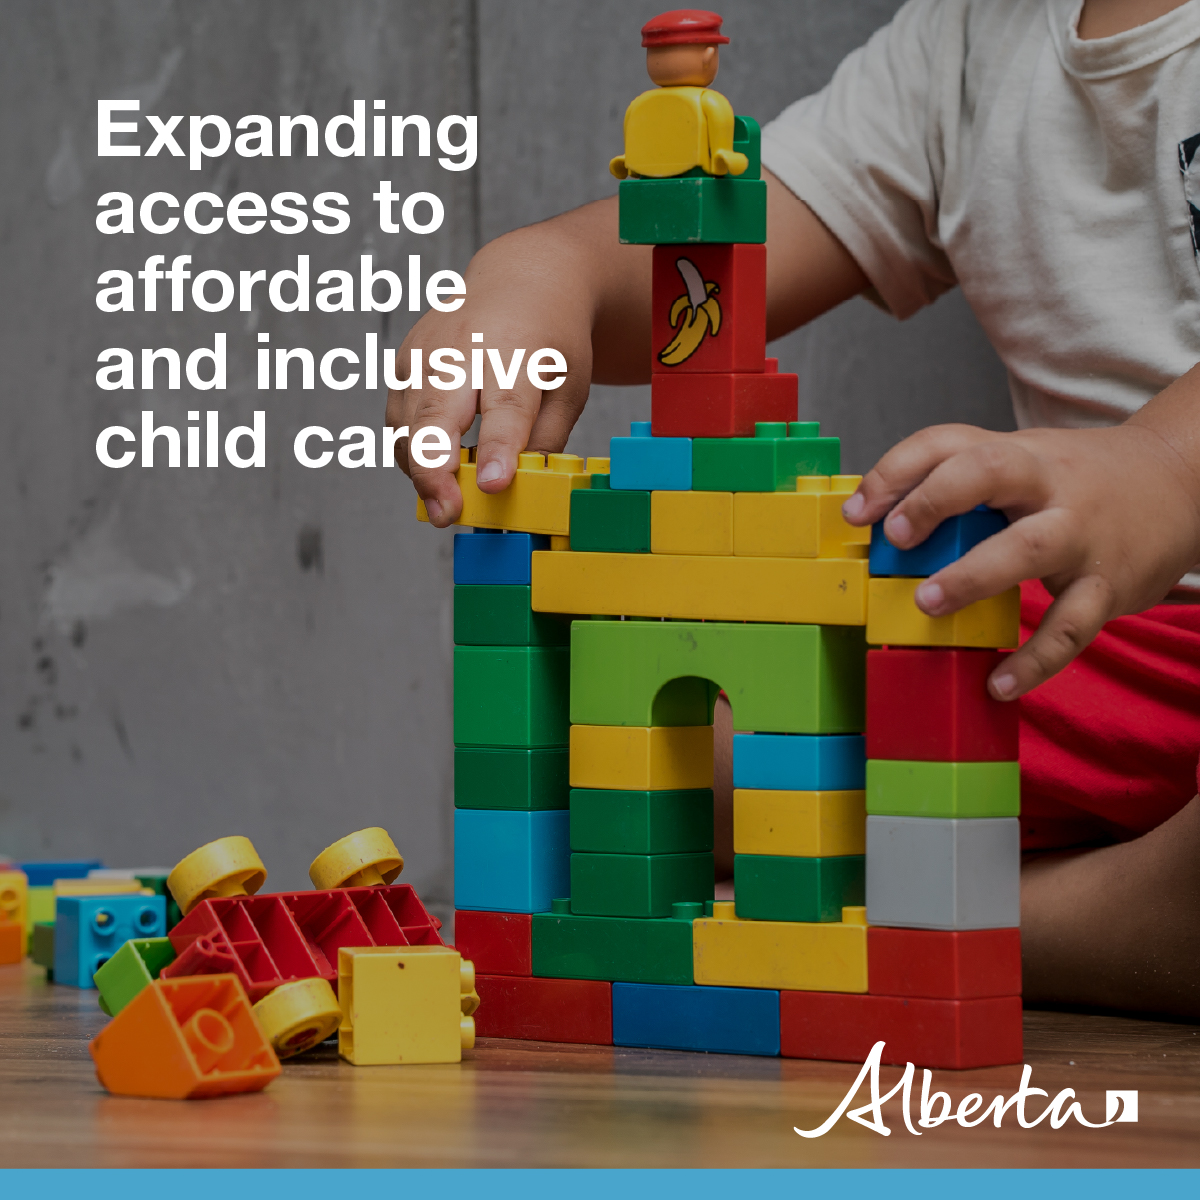 Nearly $53M in federal funding will help support the creation of child-care spaces where Alberta families need them most. We’ve committed to creating 42,500 new, licensed non-profit, public and family day home spaces and this additional funding will help us get there.